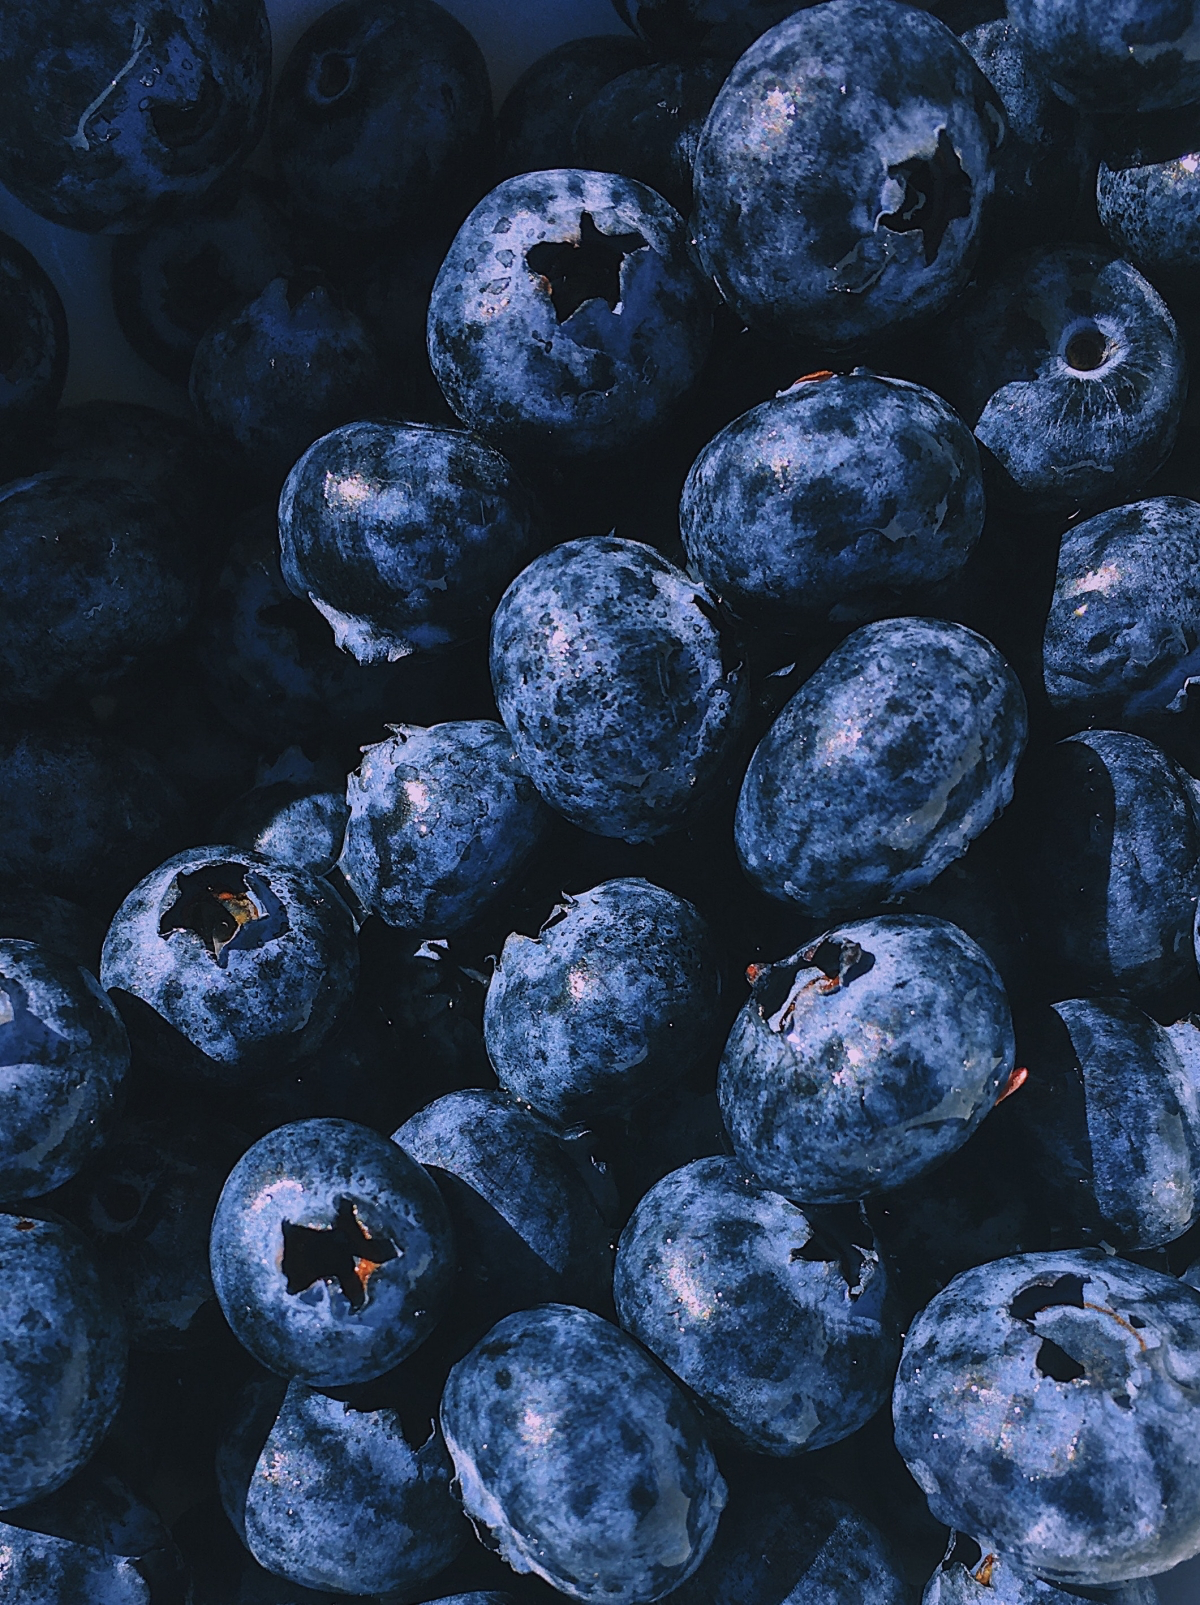 can you feed your cat blueberries